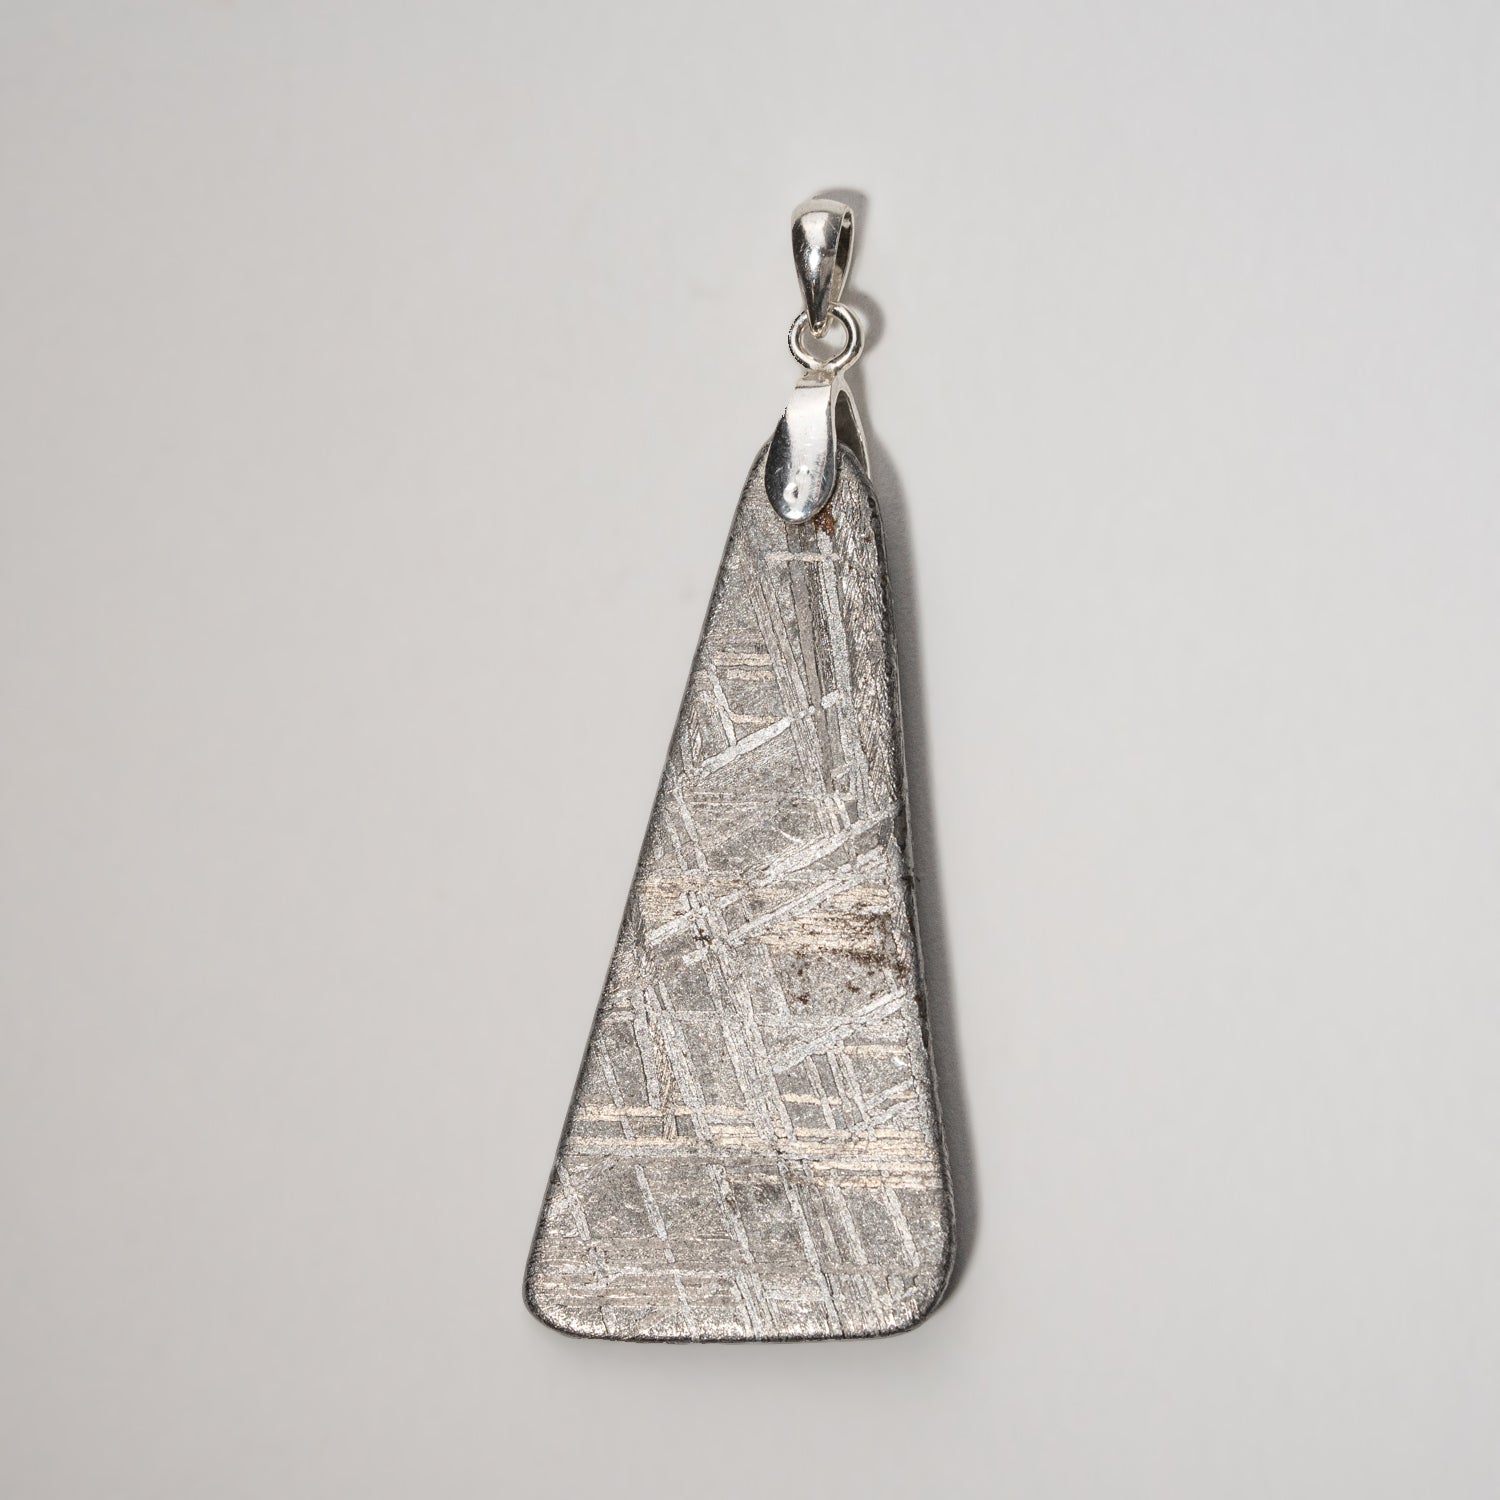 Polished Seymchan Meteorite pendant (7.2 grams) with 18" Sterling Silver Chain